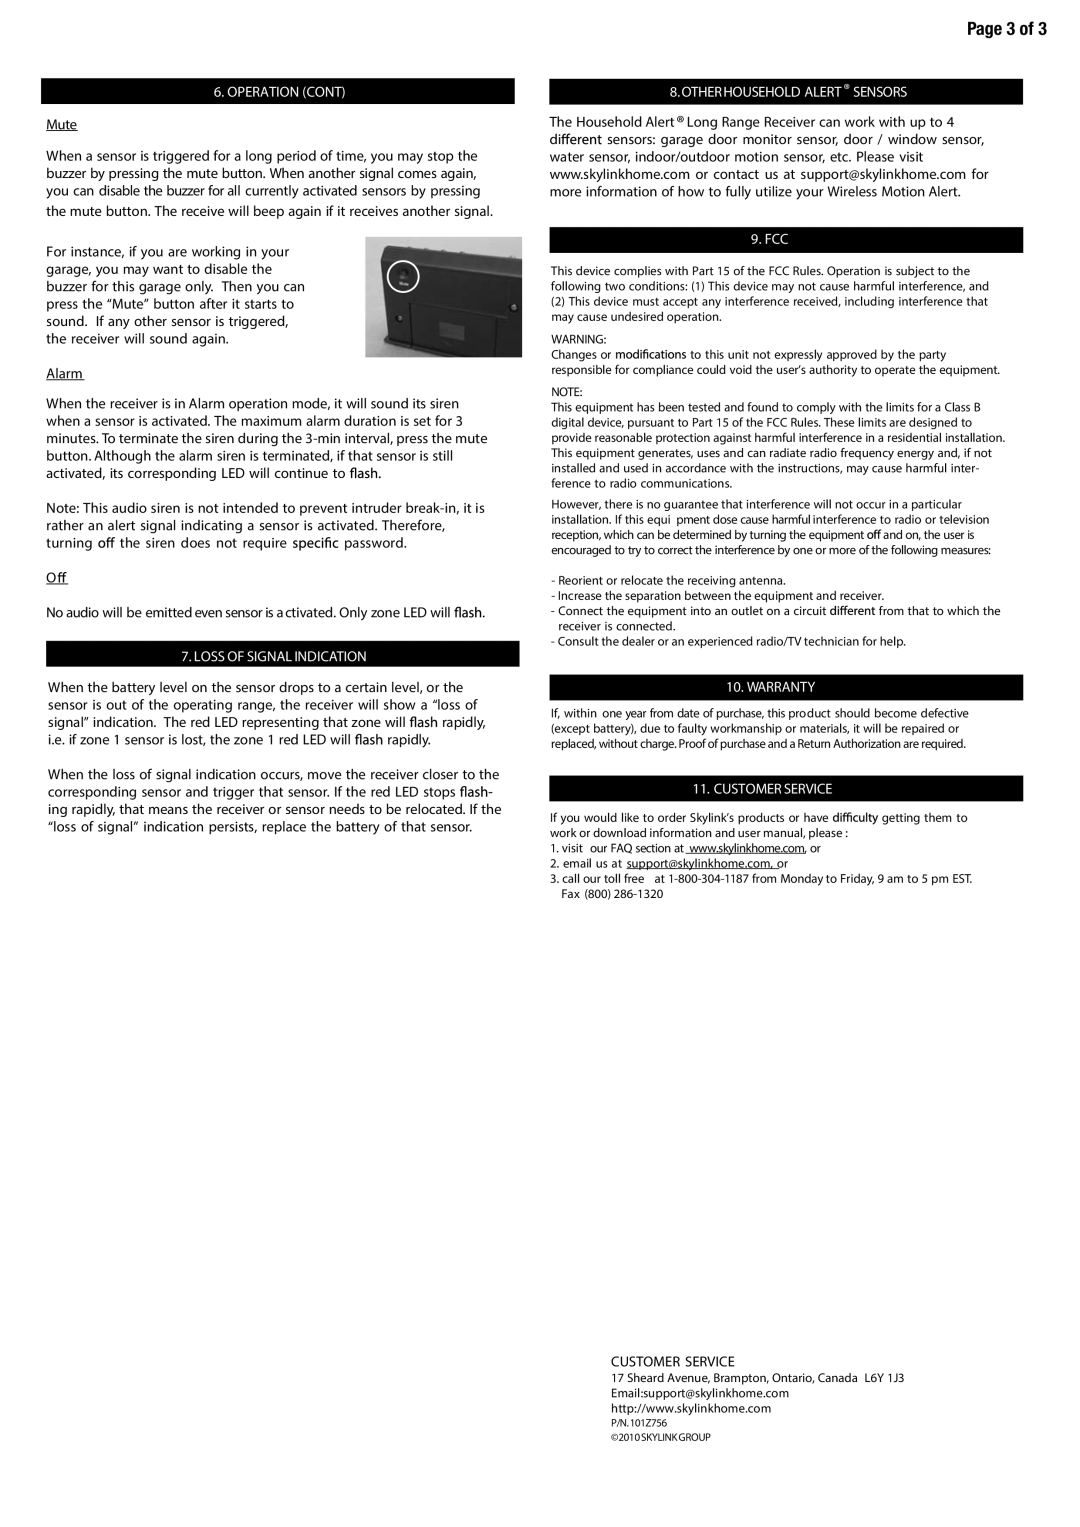 SkyLink HA-400 manual Page 3 of, Operation Cont, Loss Of Signal Indication, Otherhousehold Alert Sensors, Fcc, Warranty 